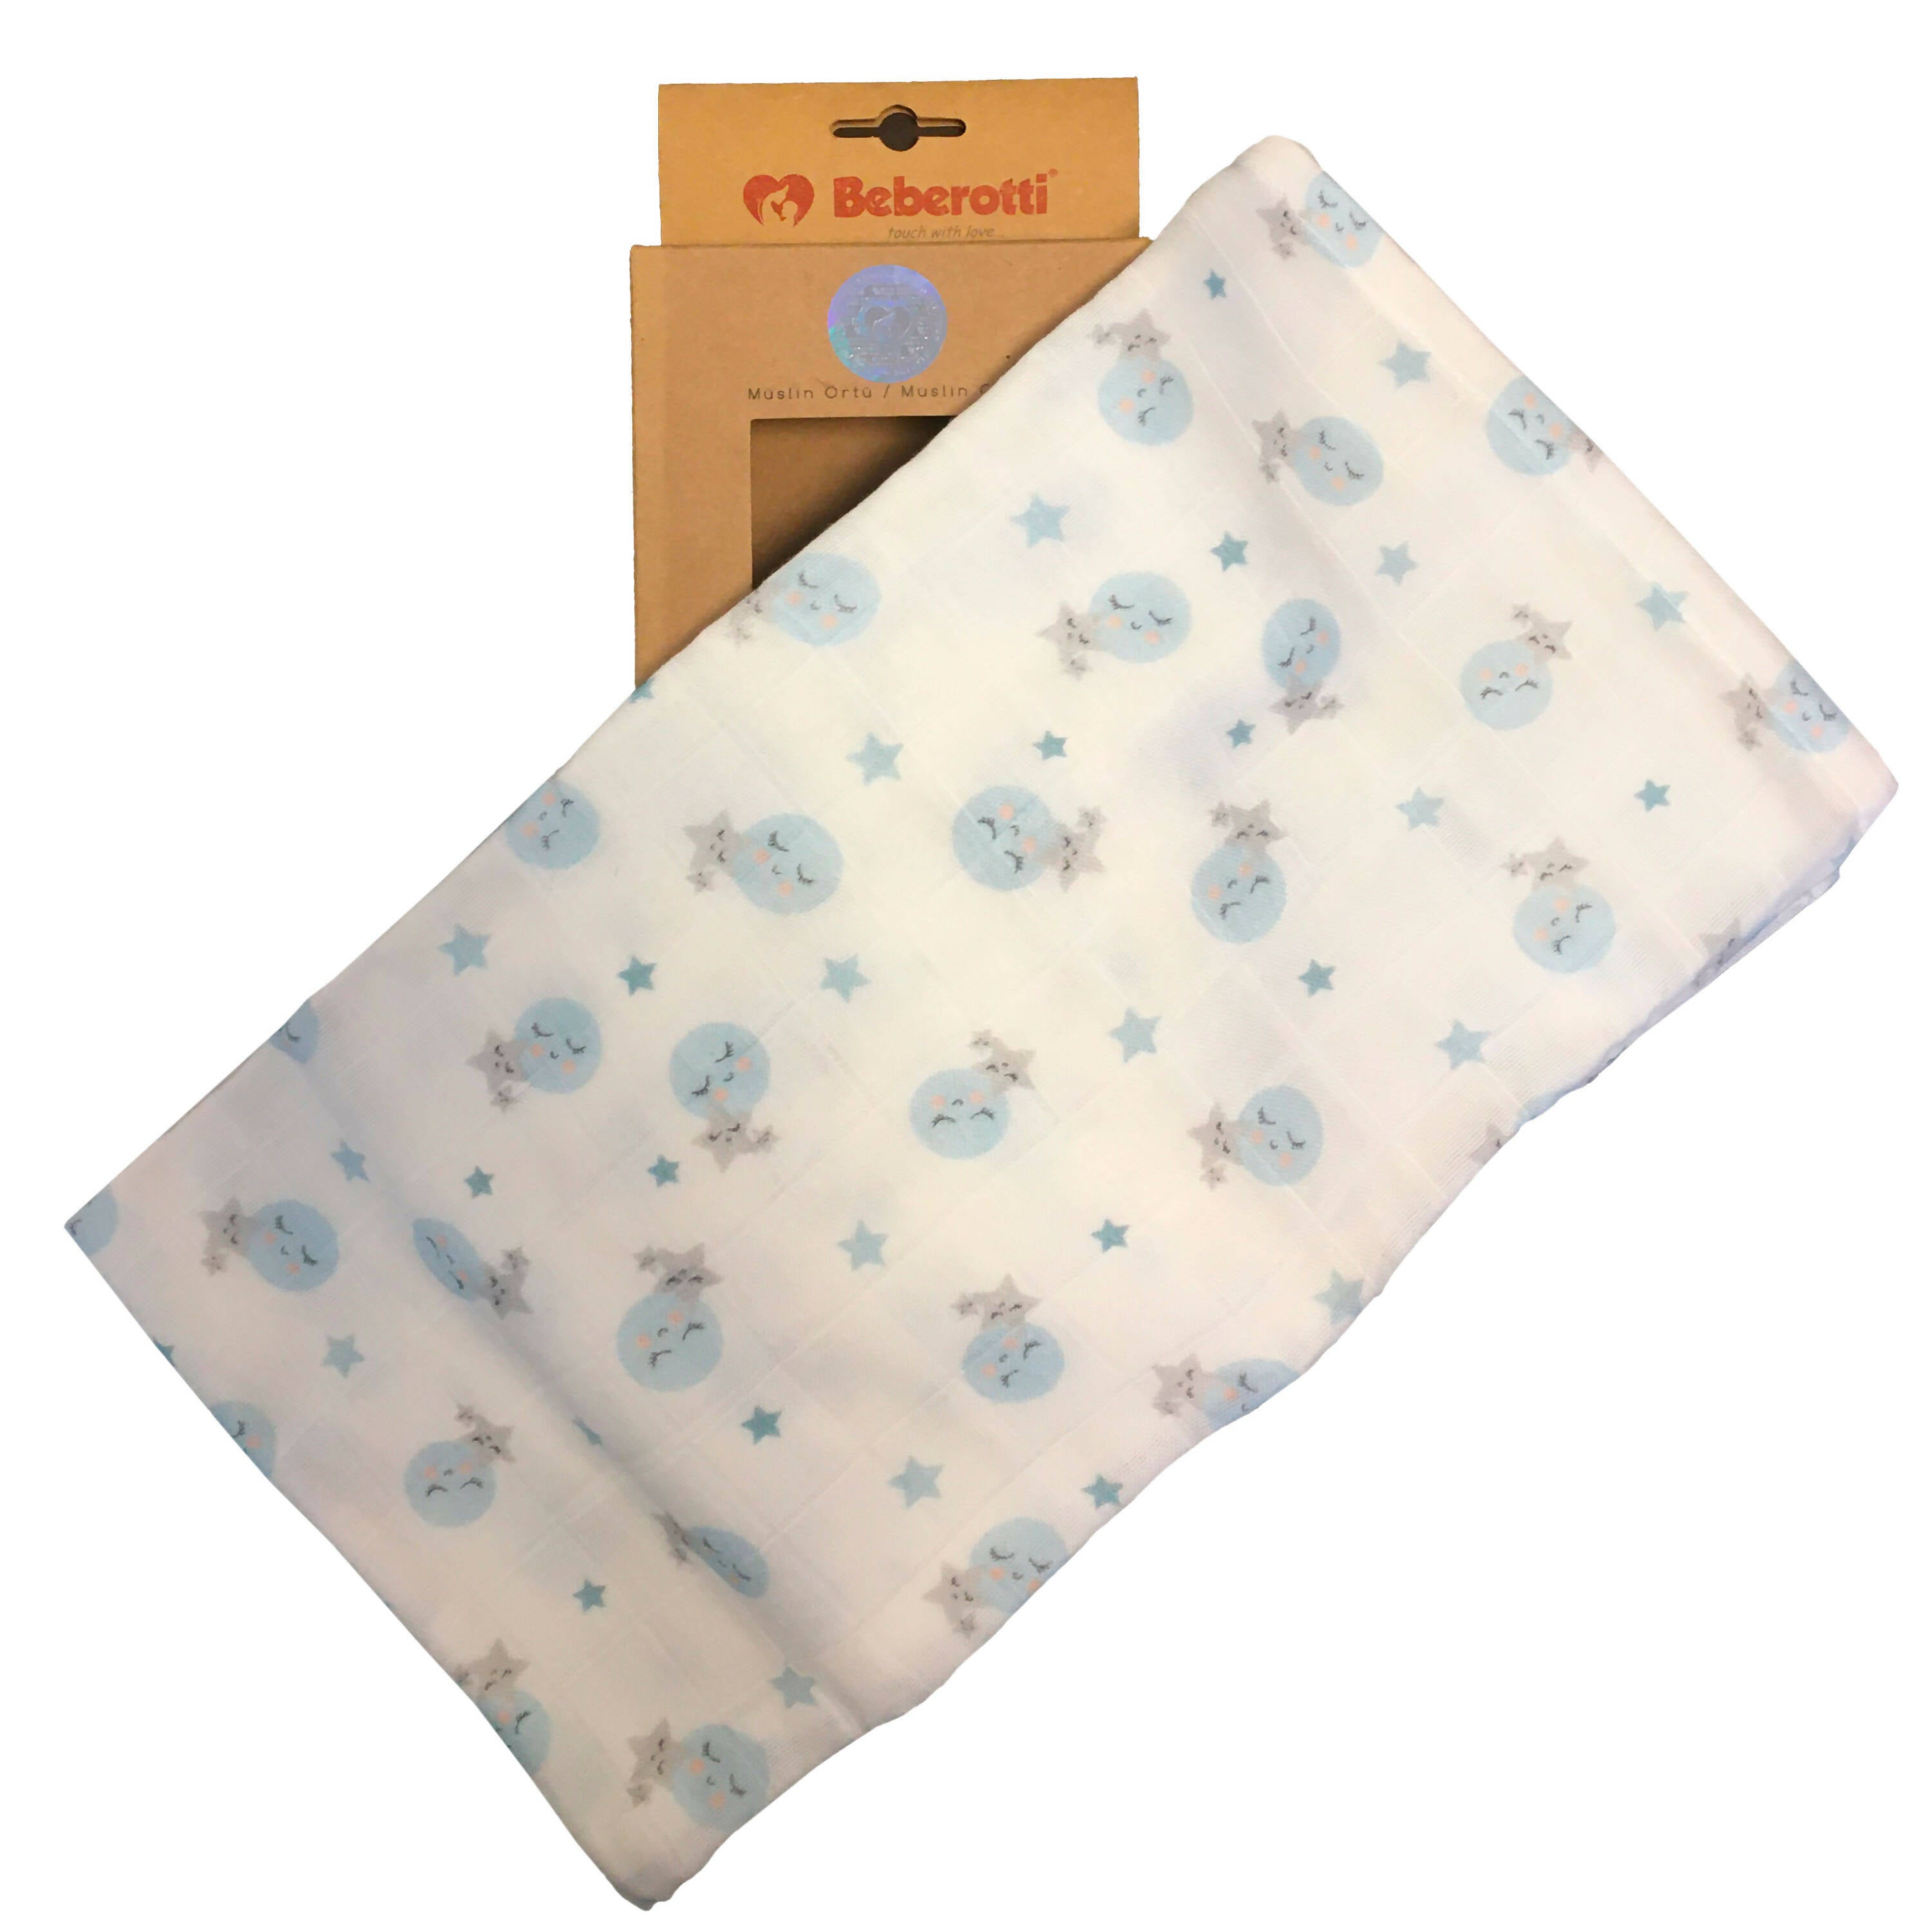 Blue Moon Printed Baby Blanket, Newborn Baby Swaddle, Mother's Cover Up, 100% Cotton Muslin, Baby Shower Gifts - Wear Sierra